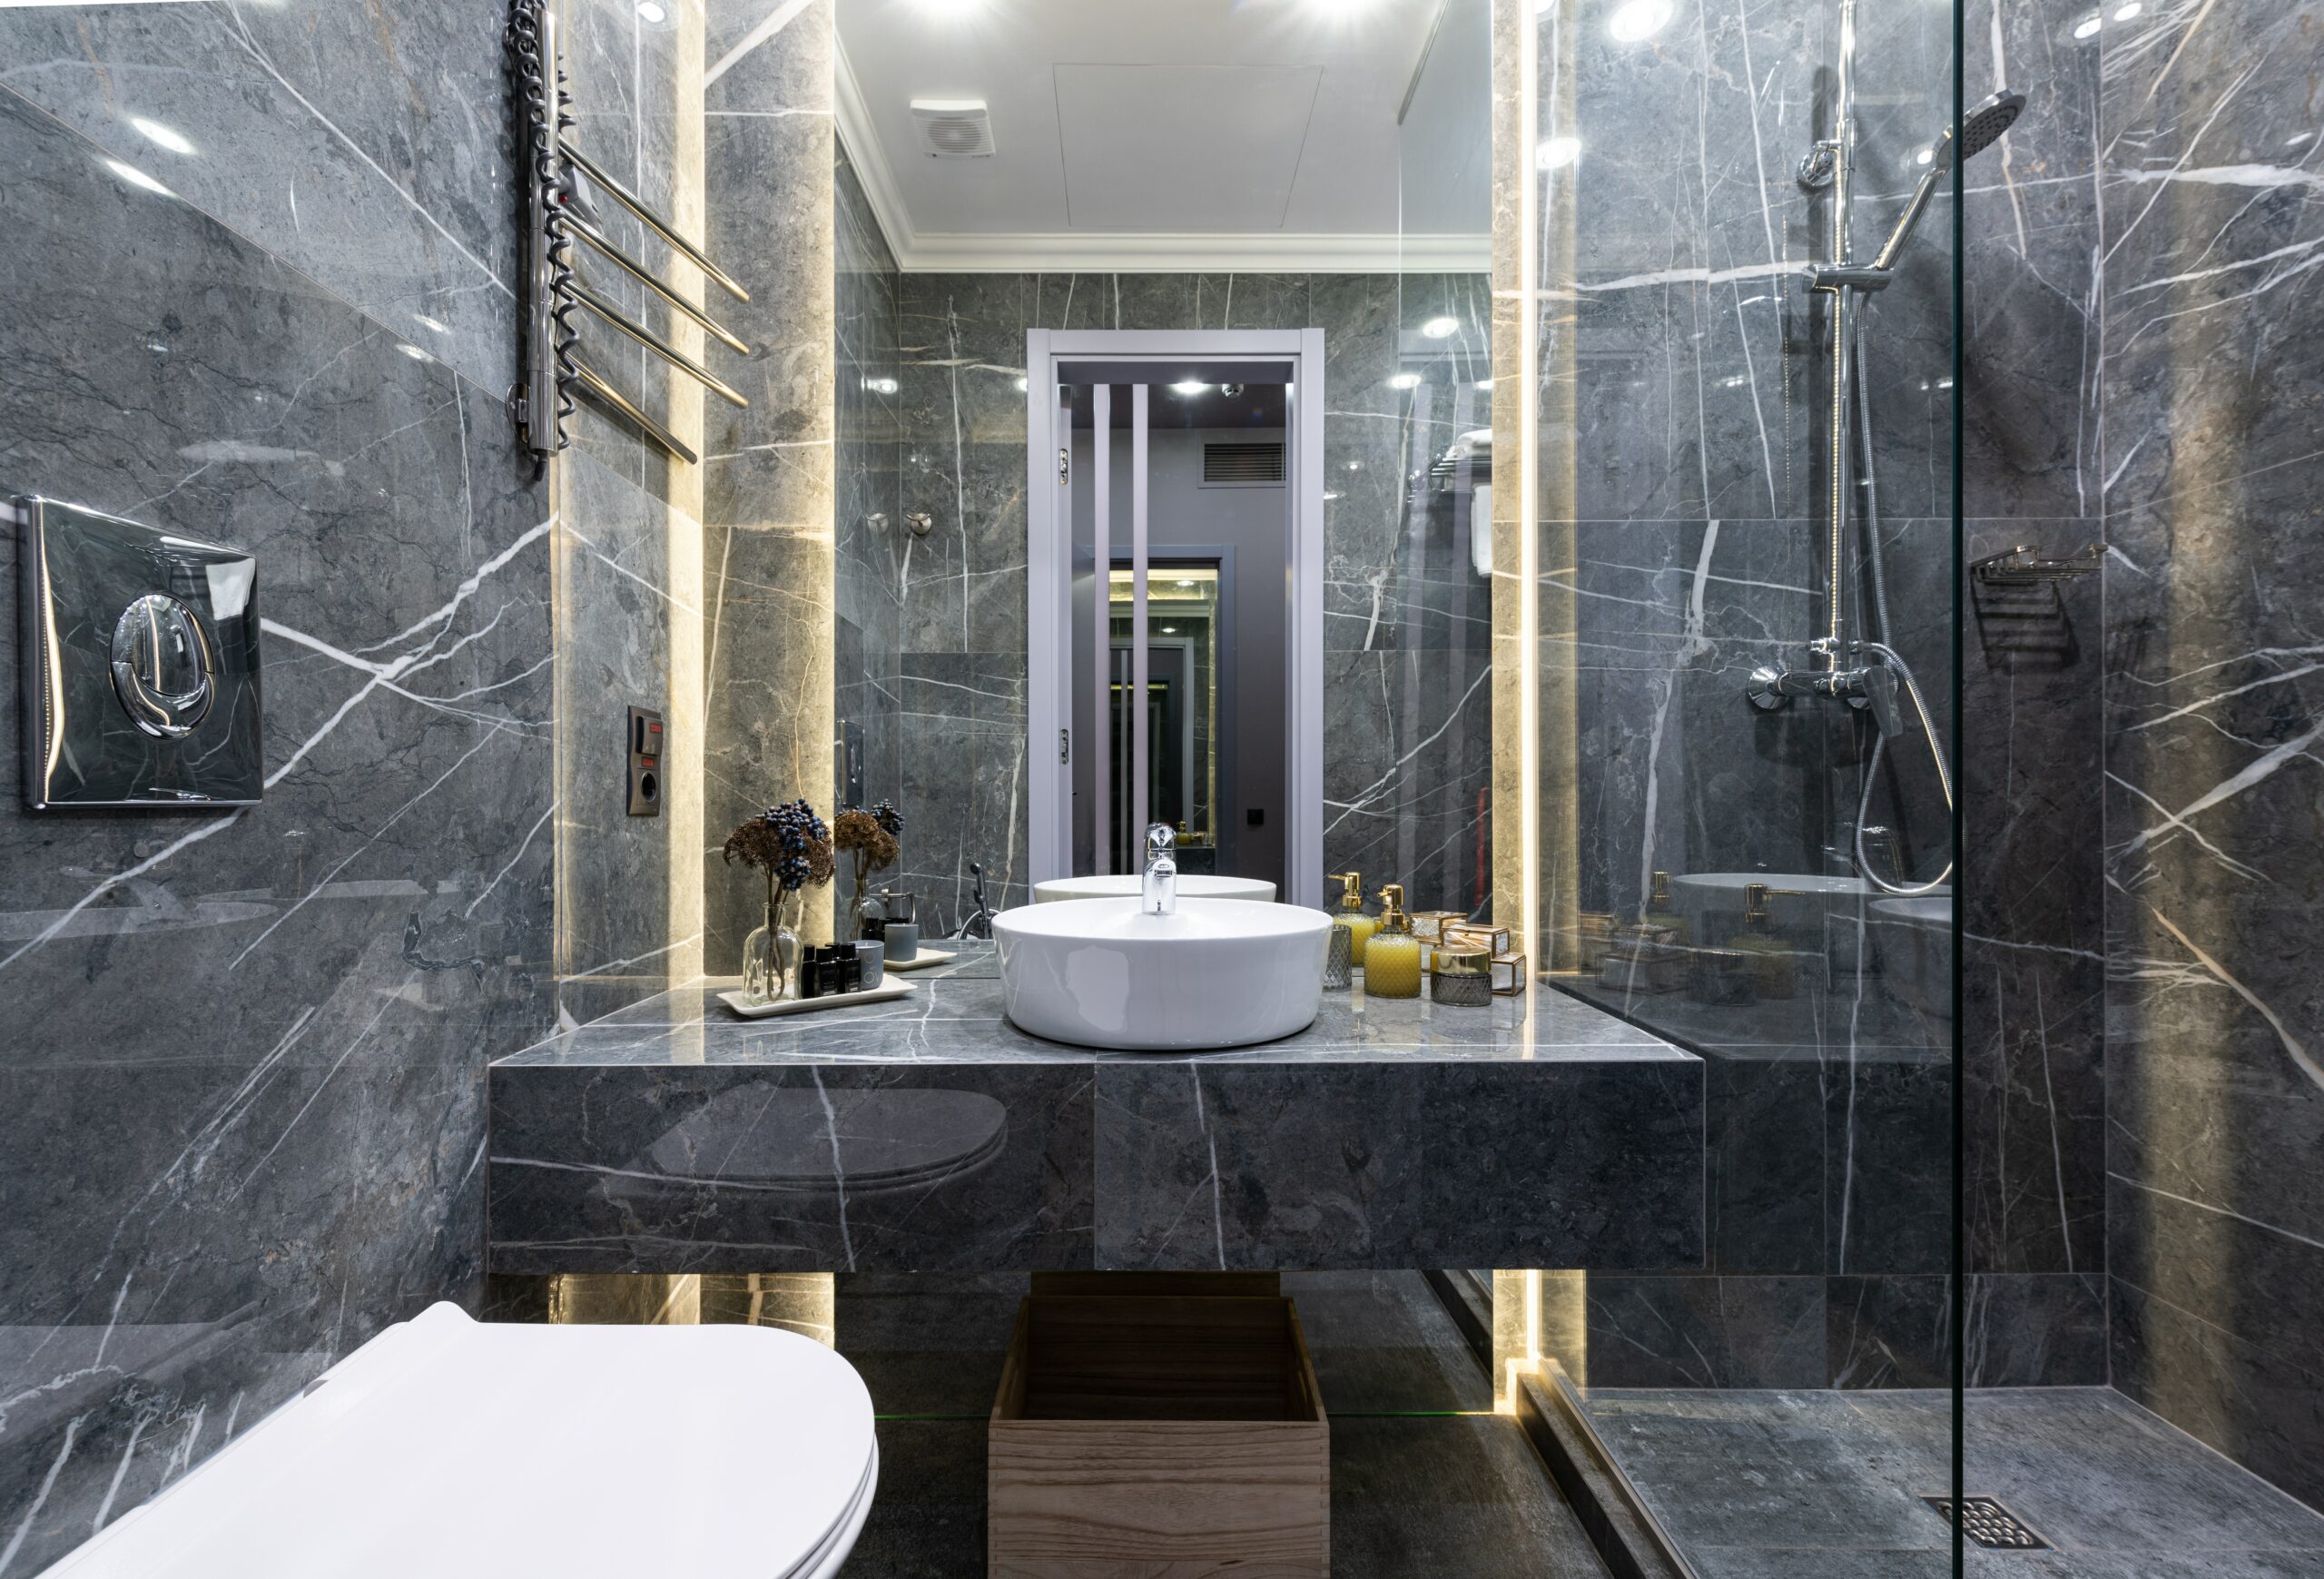 A marble bathroom is one way to transform your bathroom into a spa-like retreat